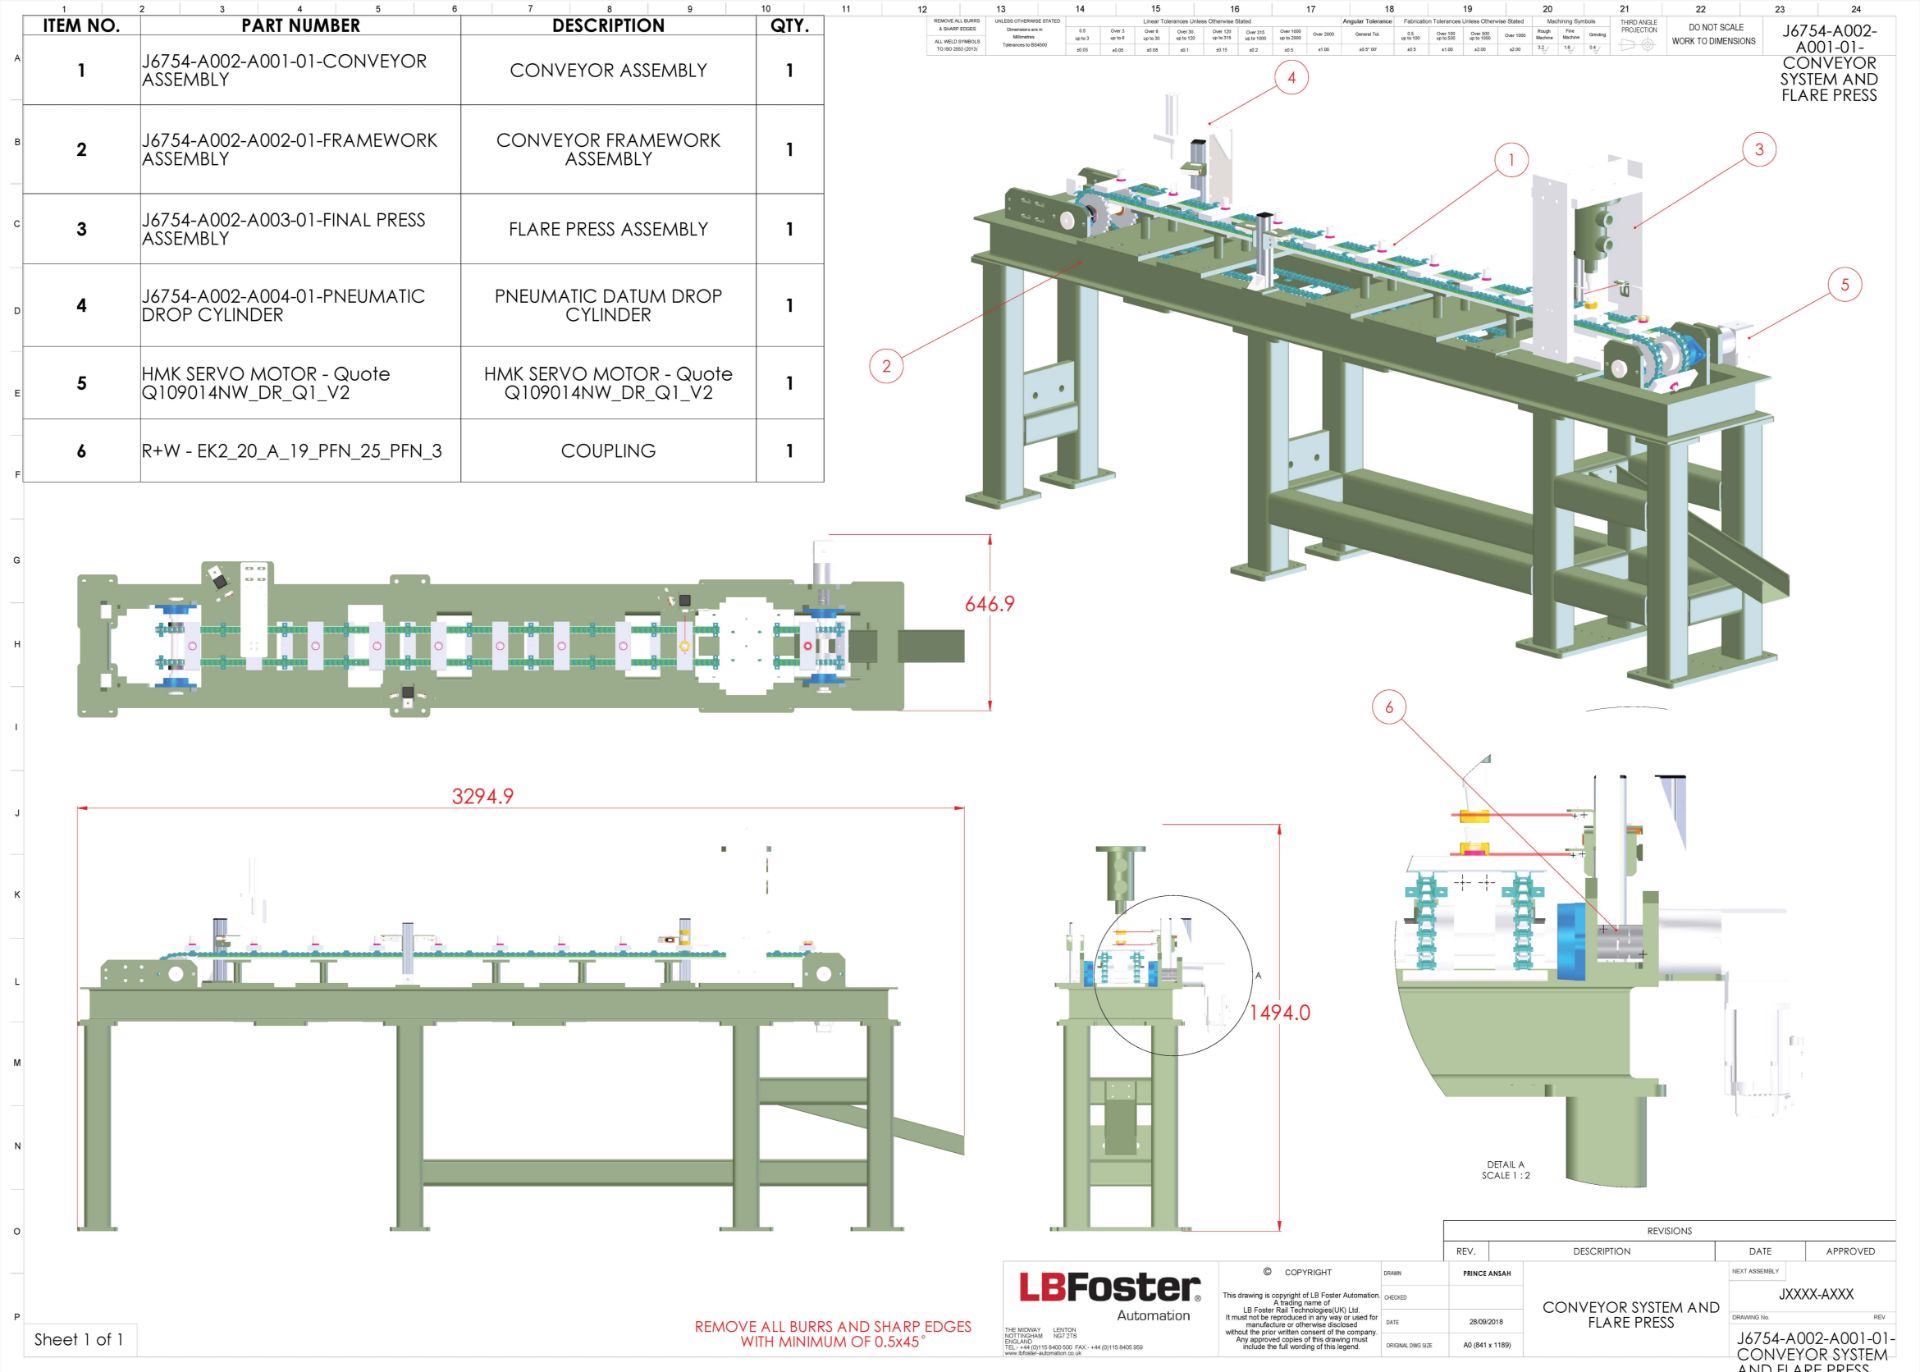 LB Foster Automation Brass Nut and Liner Forming Machine (2019), Serial Number 001 - Image 14 of 17